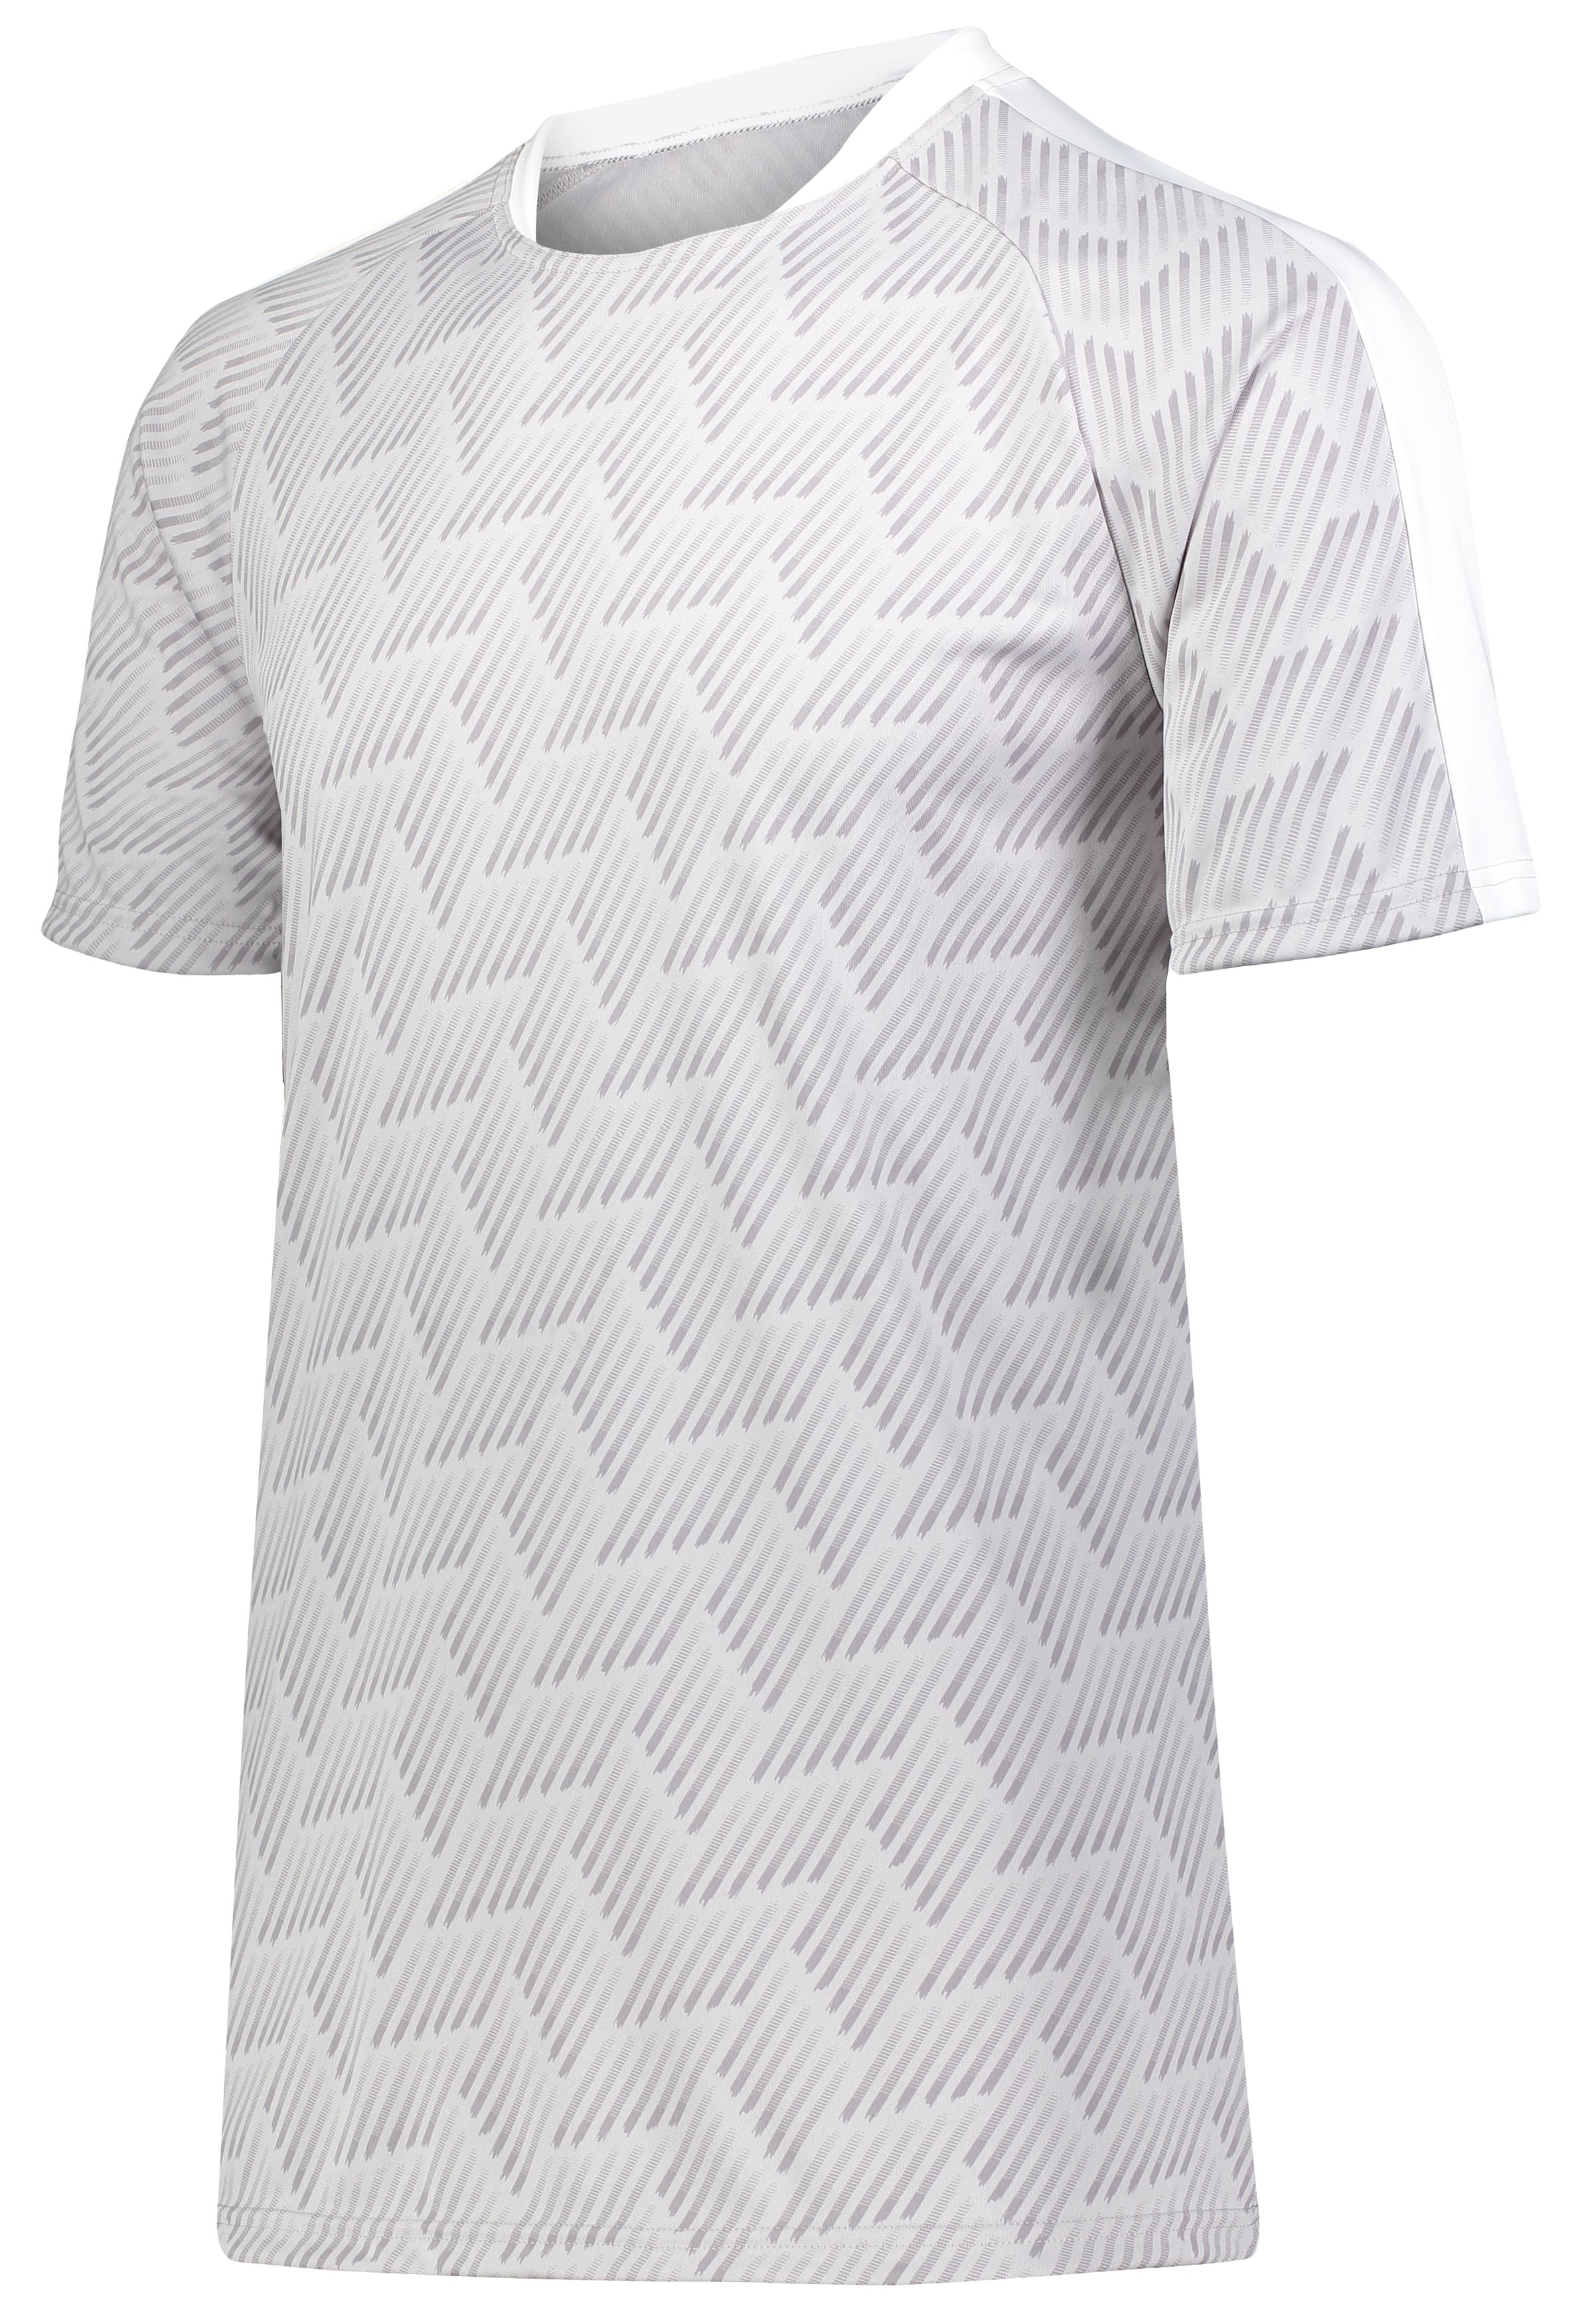 High 5 Hypervolt Jersey in Graphite Print/White  -Part of the Adult, Adult-Jersey, High5-Products, Soccer, Shirts, All-Sports-1 product lines at KanaleyCreations.com